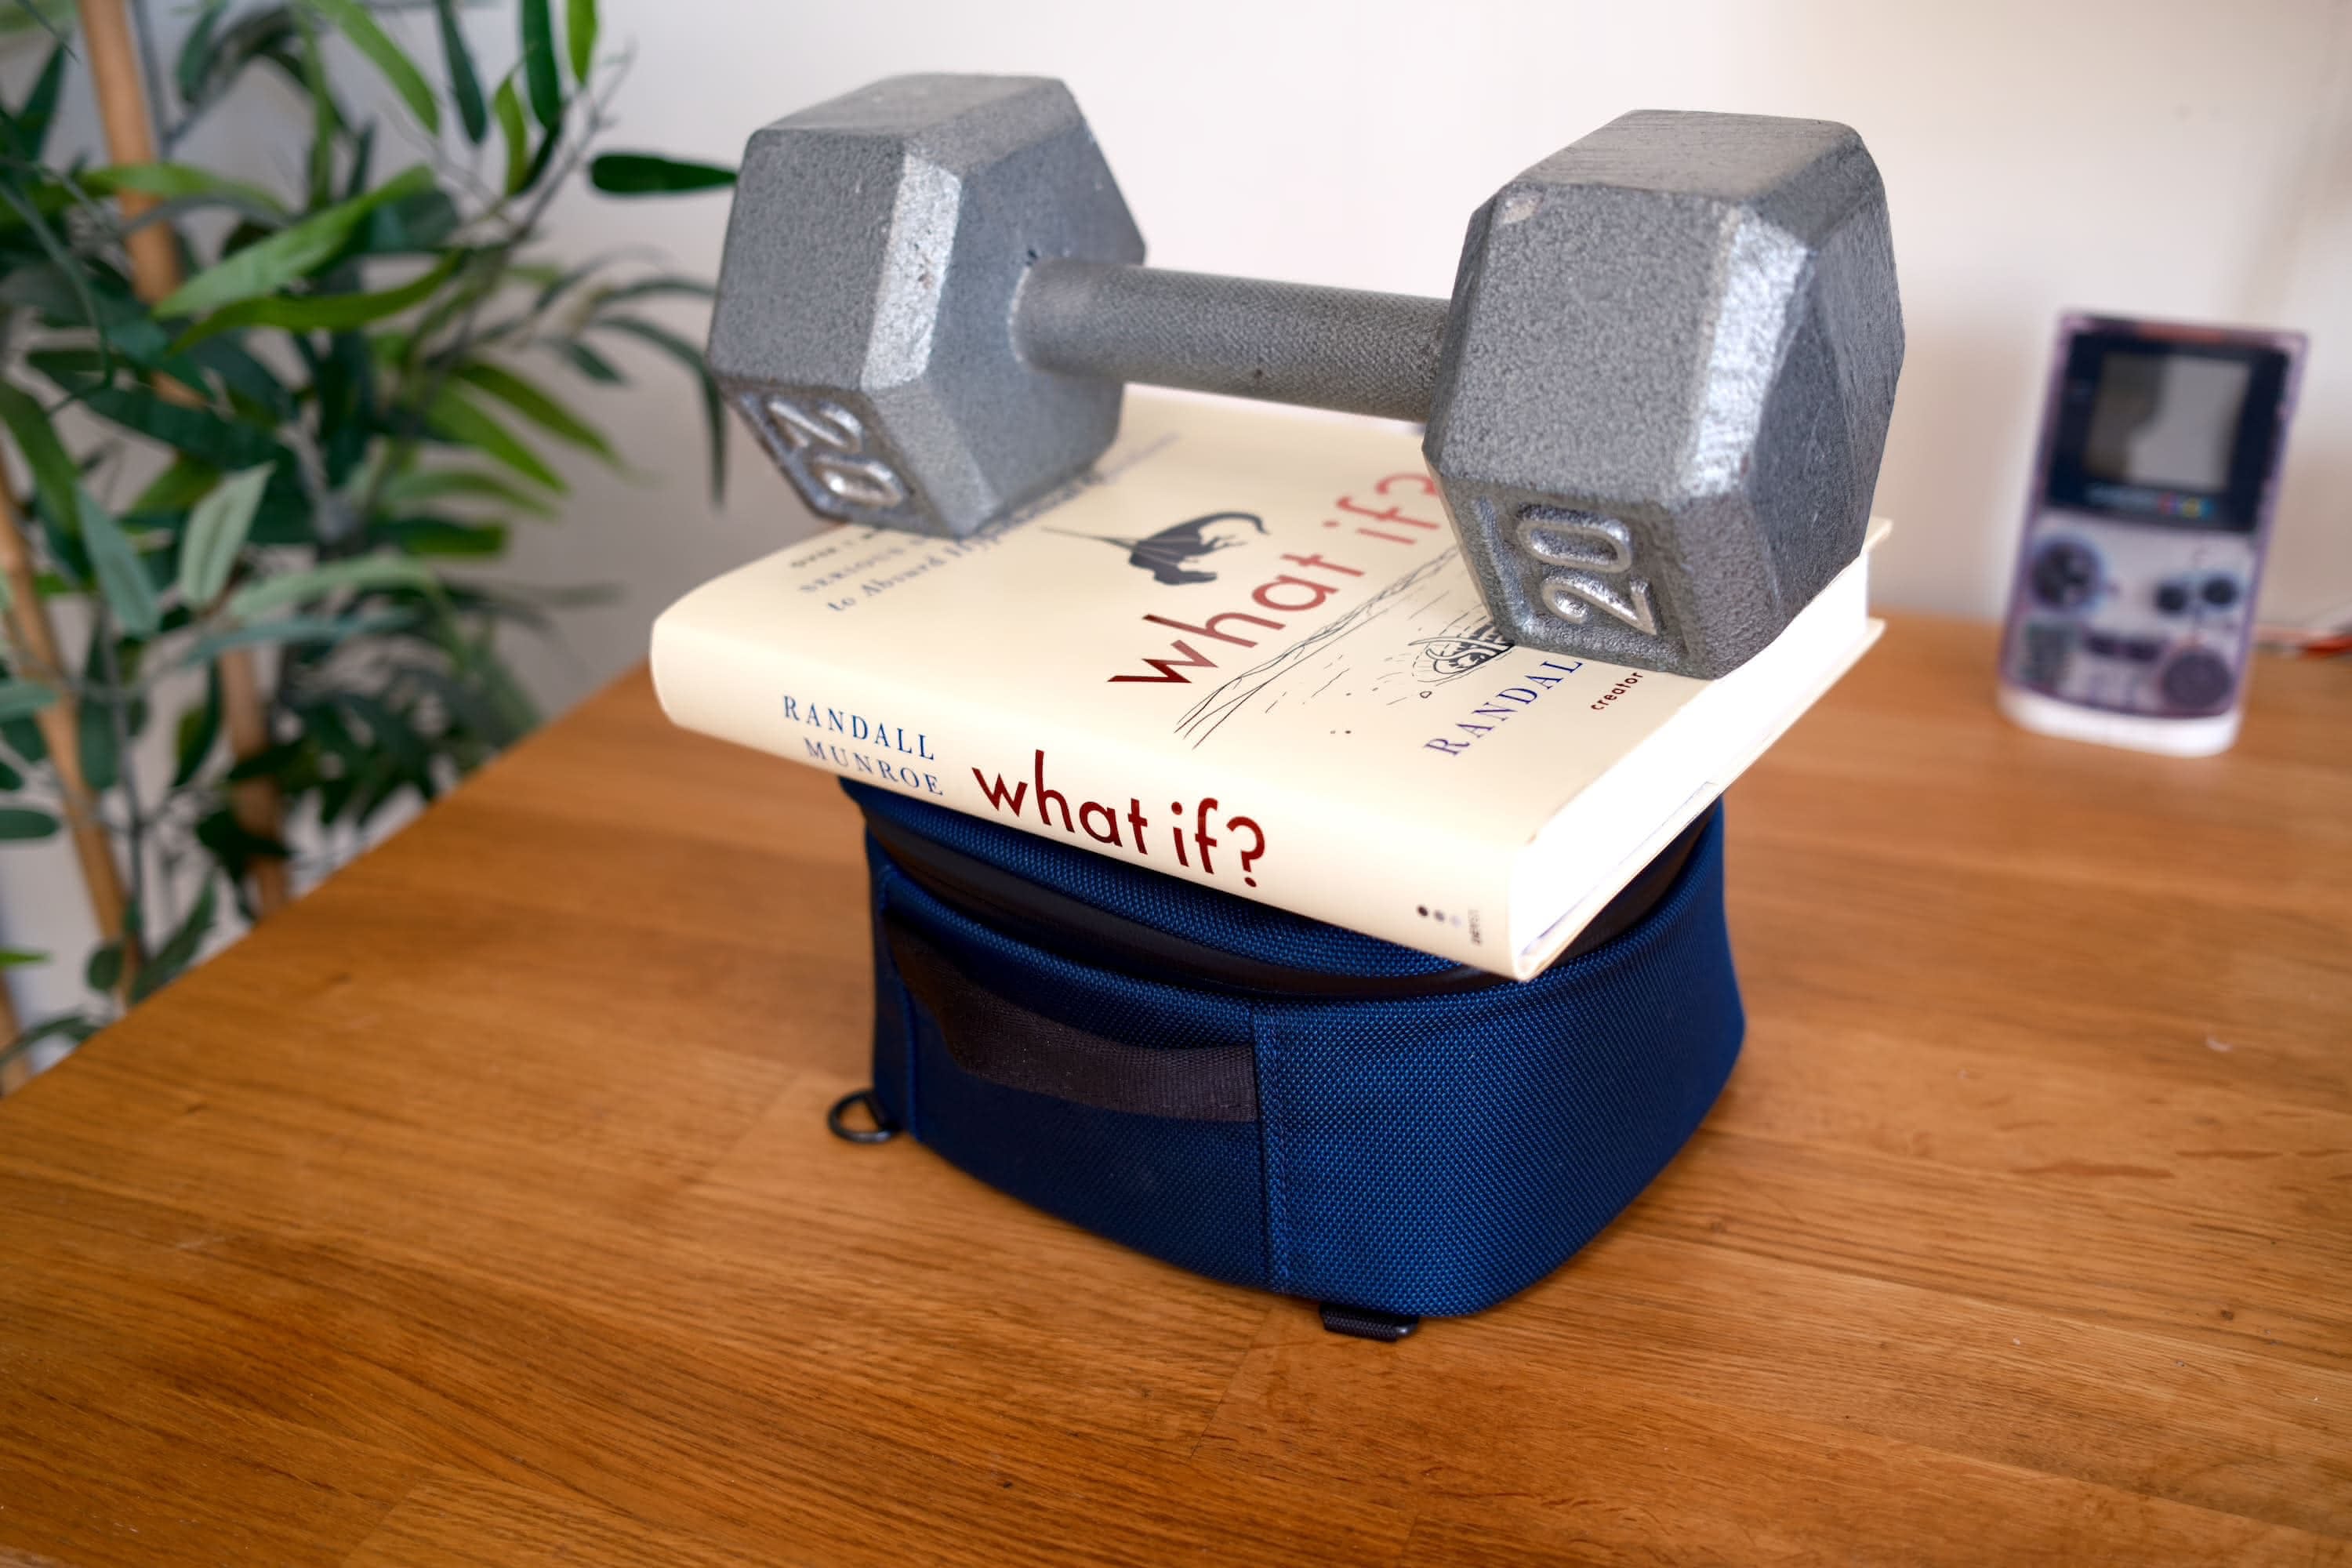 Dumbbell sitting on top of a book ('what if?' by Randall Monroe) sitting on top of the case showing no deforming.